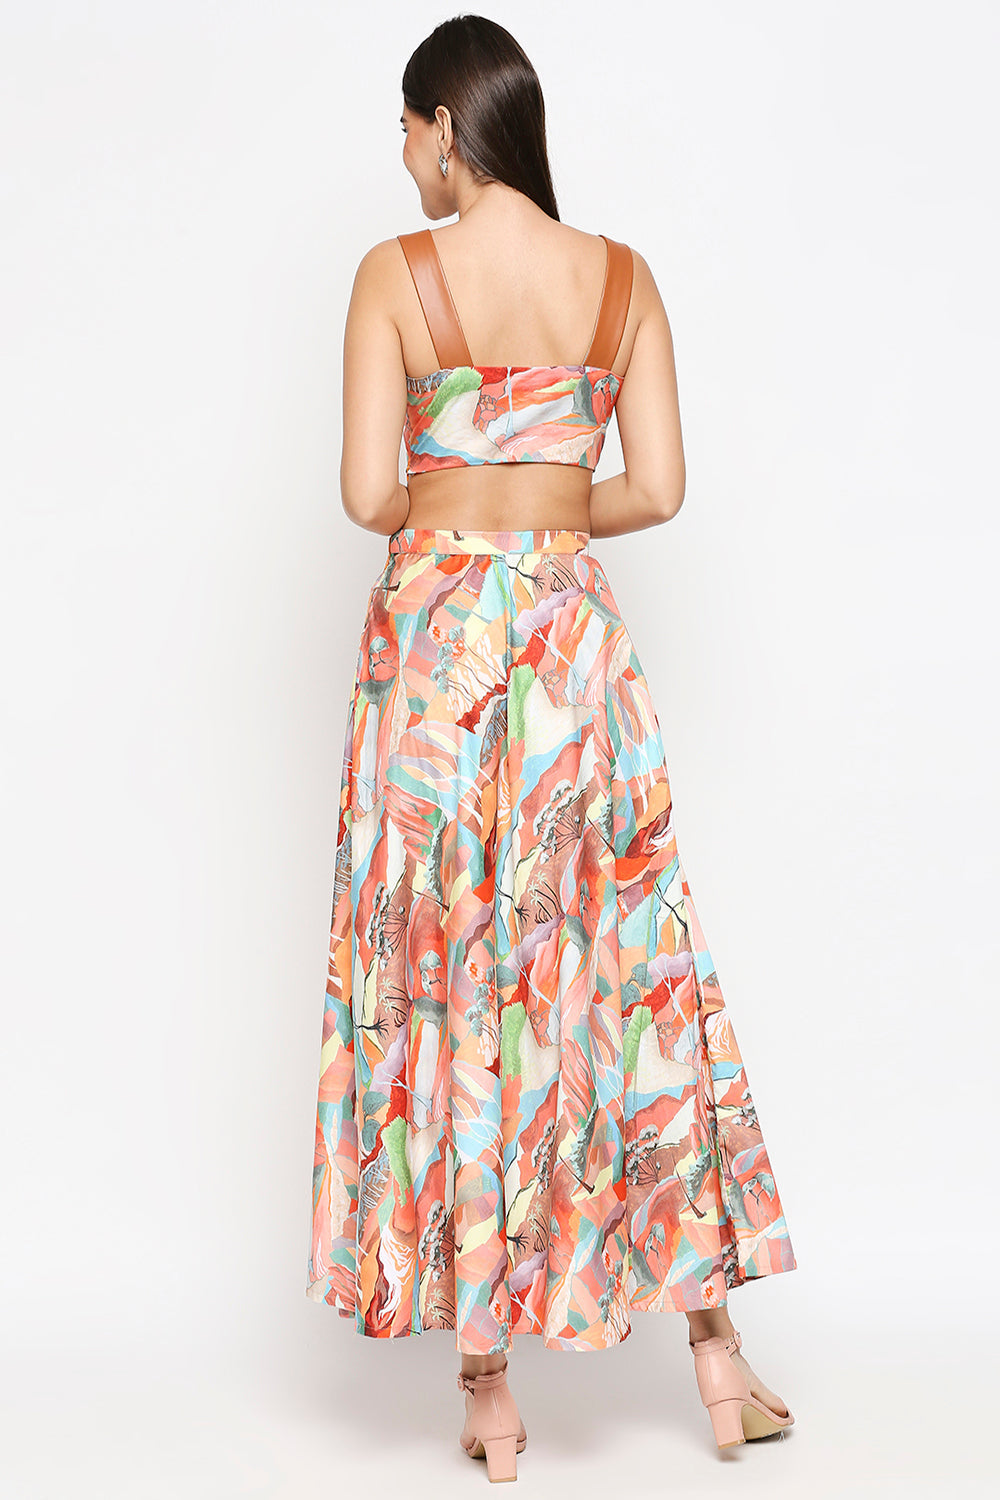 Jungle Printed Cotton Twill Bustier Top With Leather Straps Paired With Printed Circular Skirt